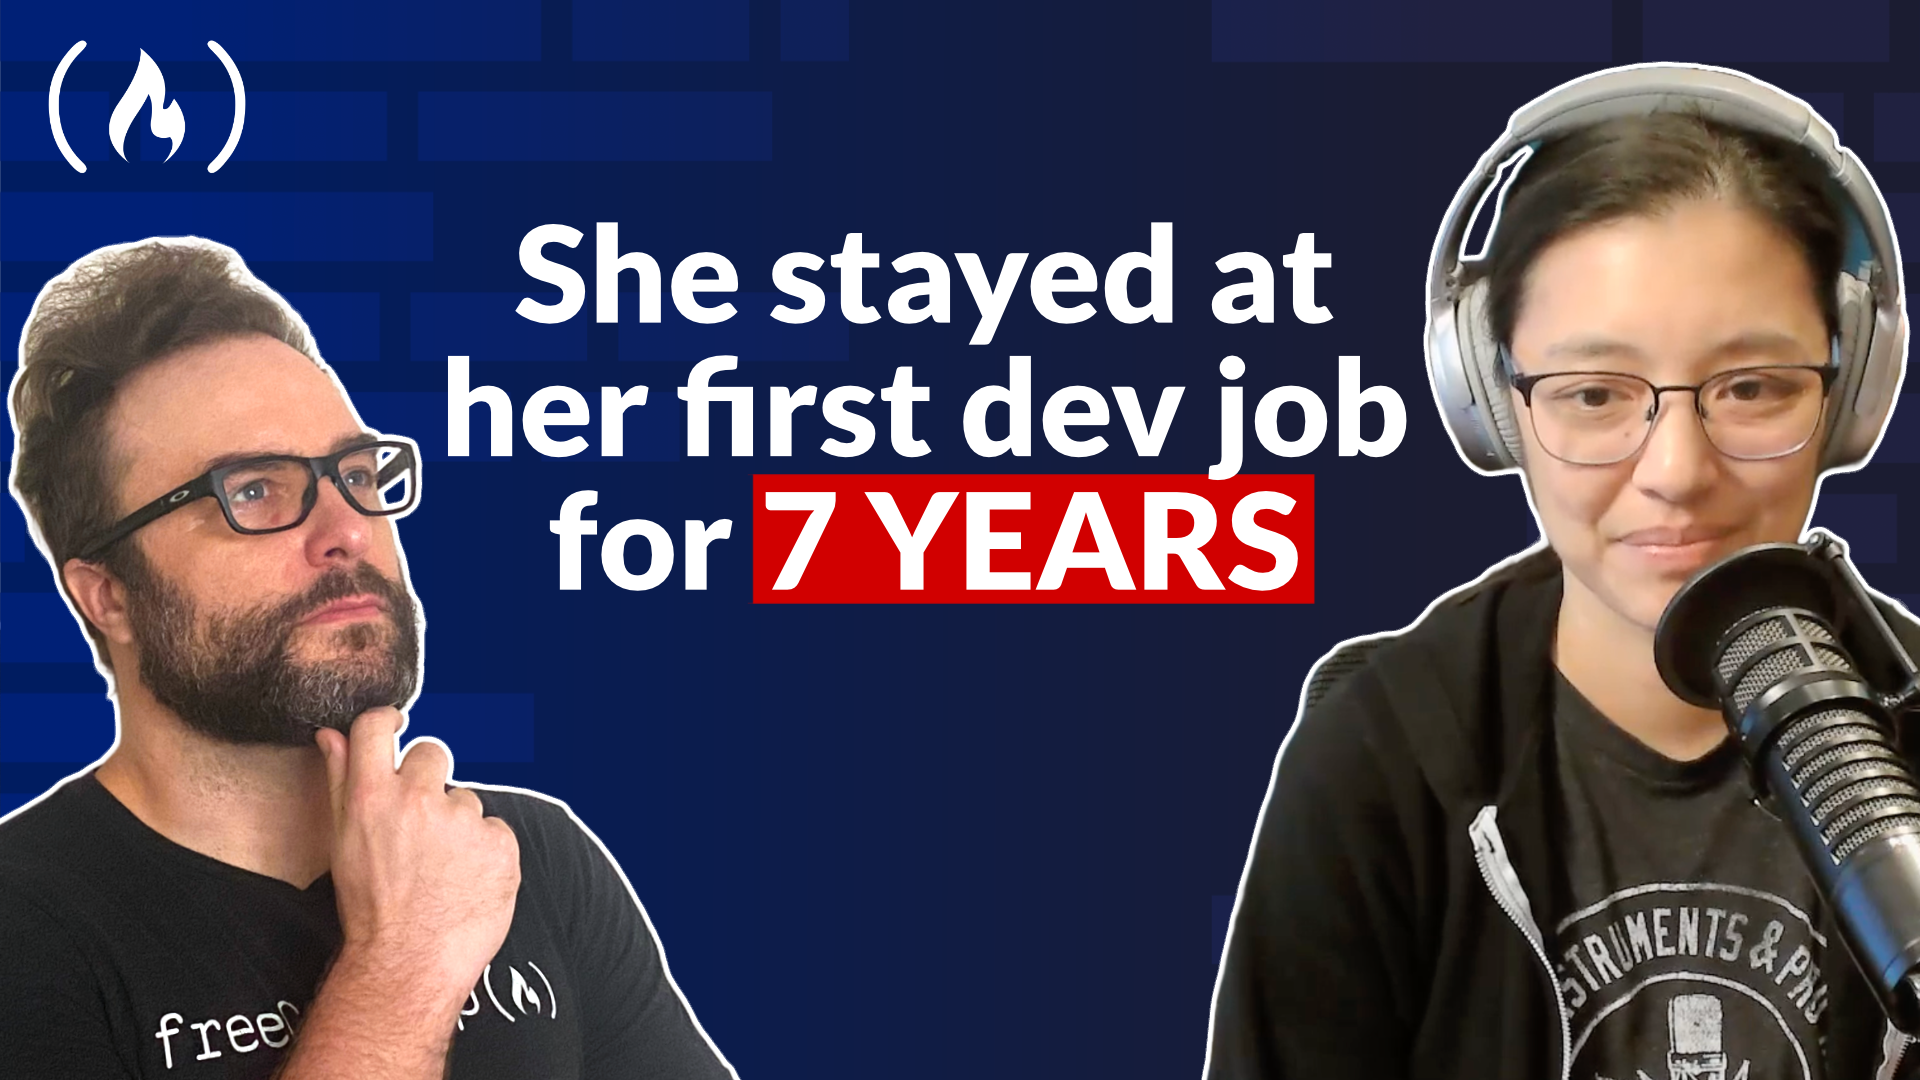 Image for From doing data entry to becoming a developer with Jessica Chan AKA Coder Coder [Podcast #132]